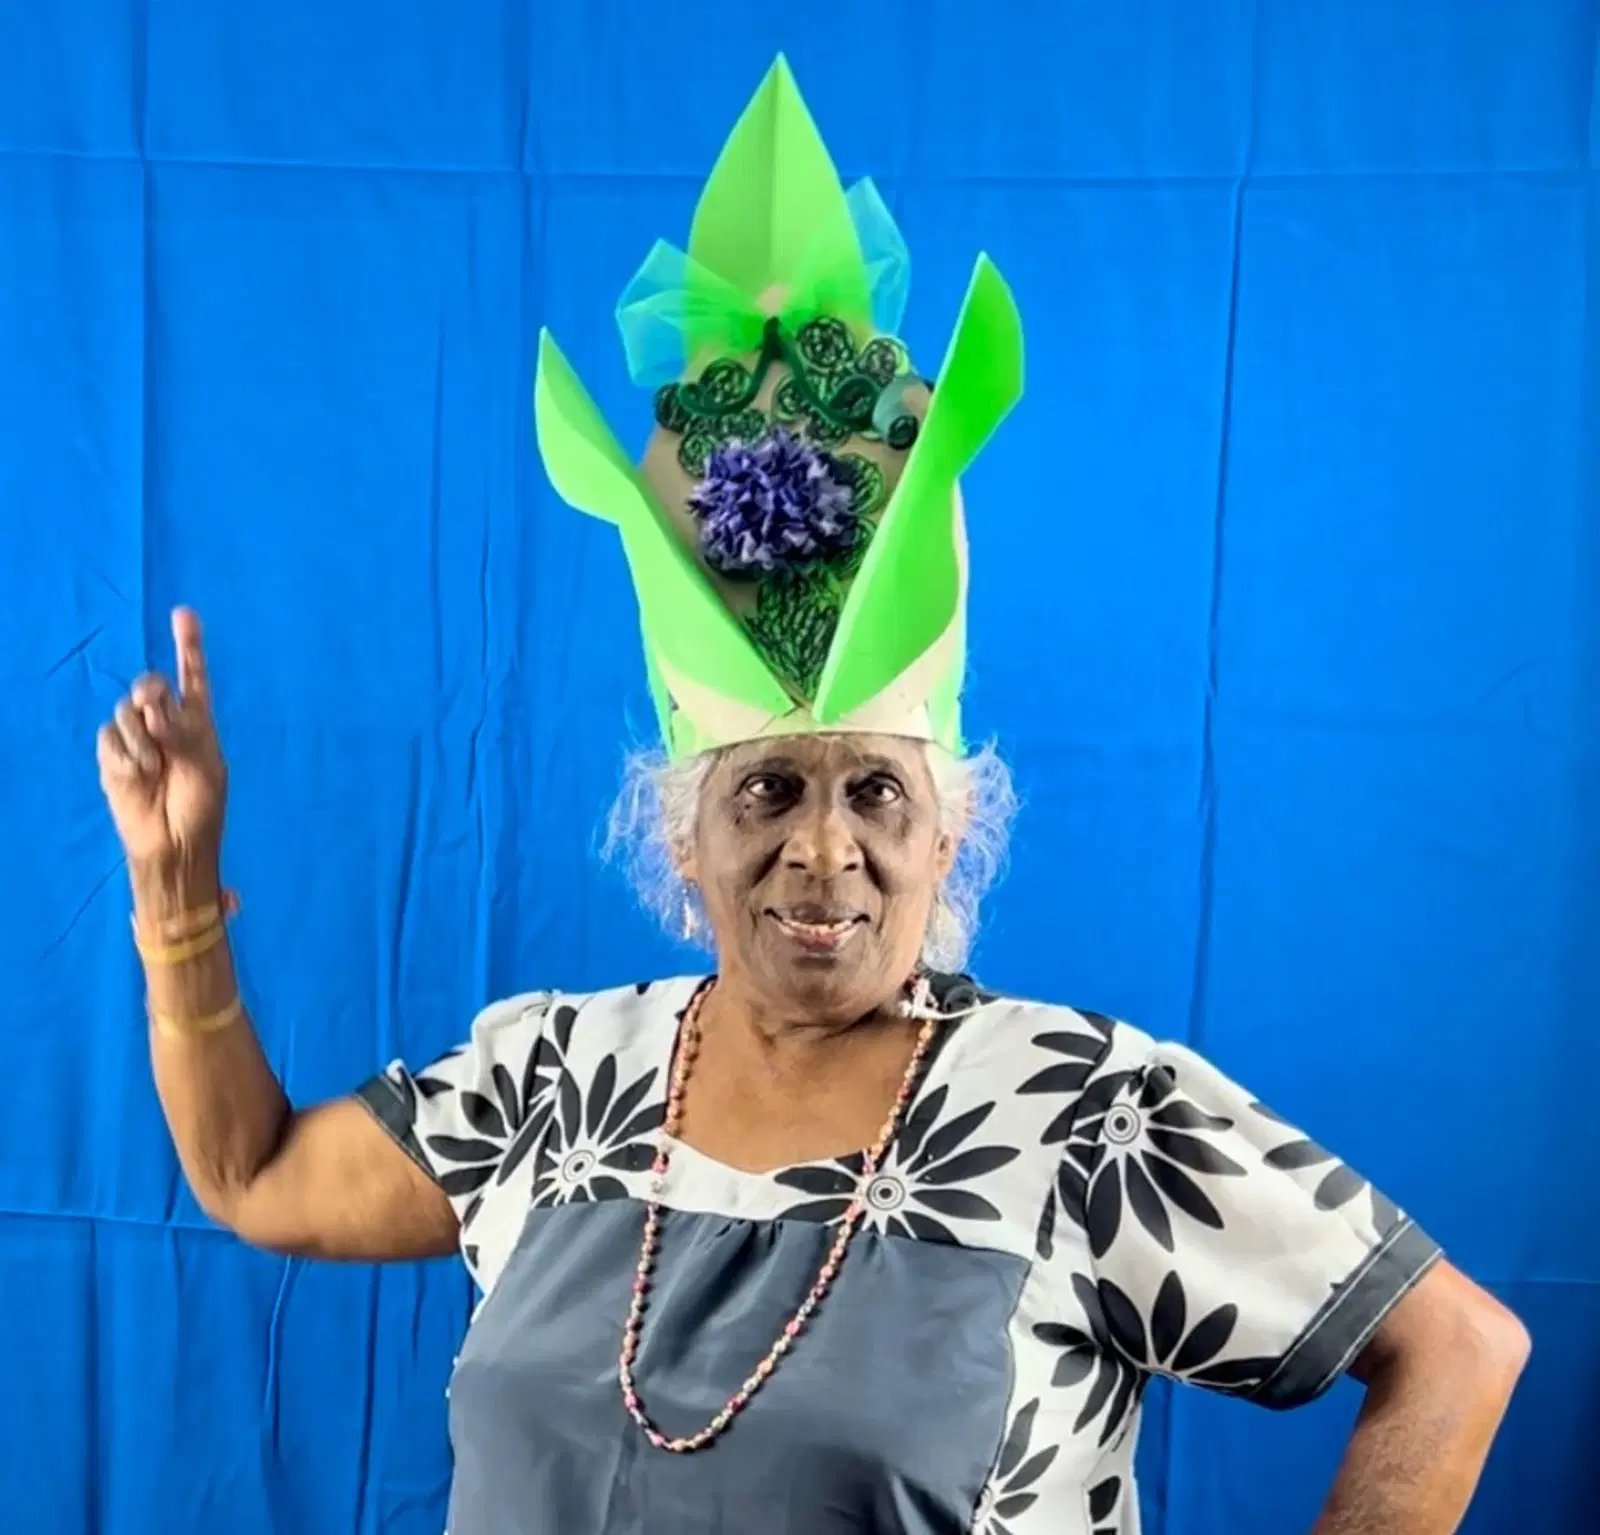 A person wearing a costume headdress with a floral and feather design poses confidently against a blue background.